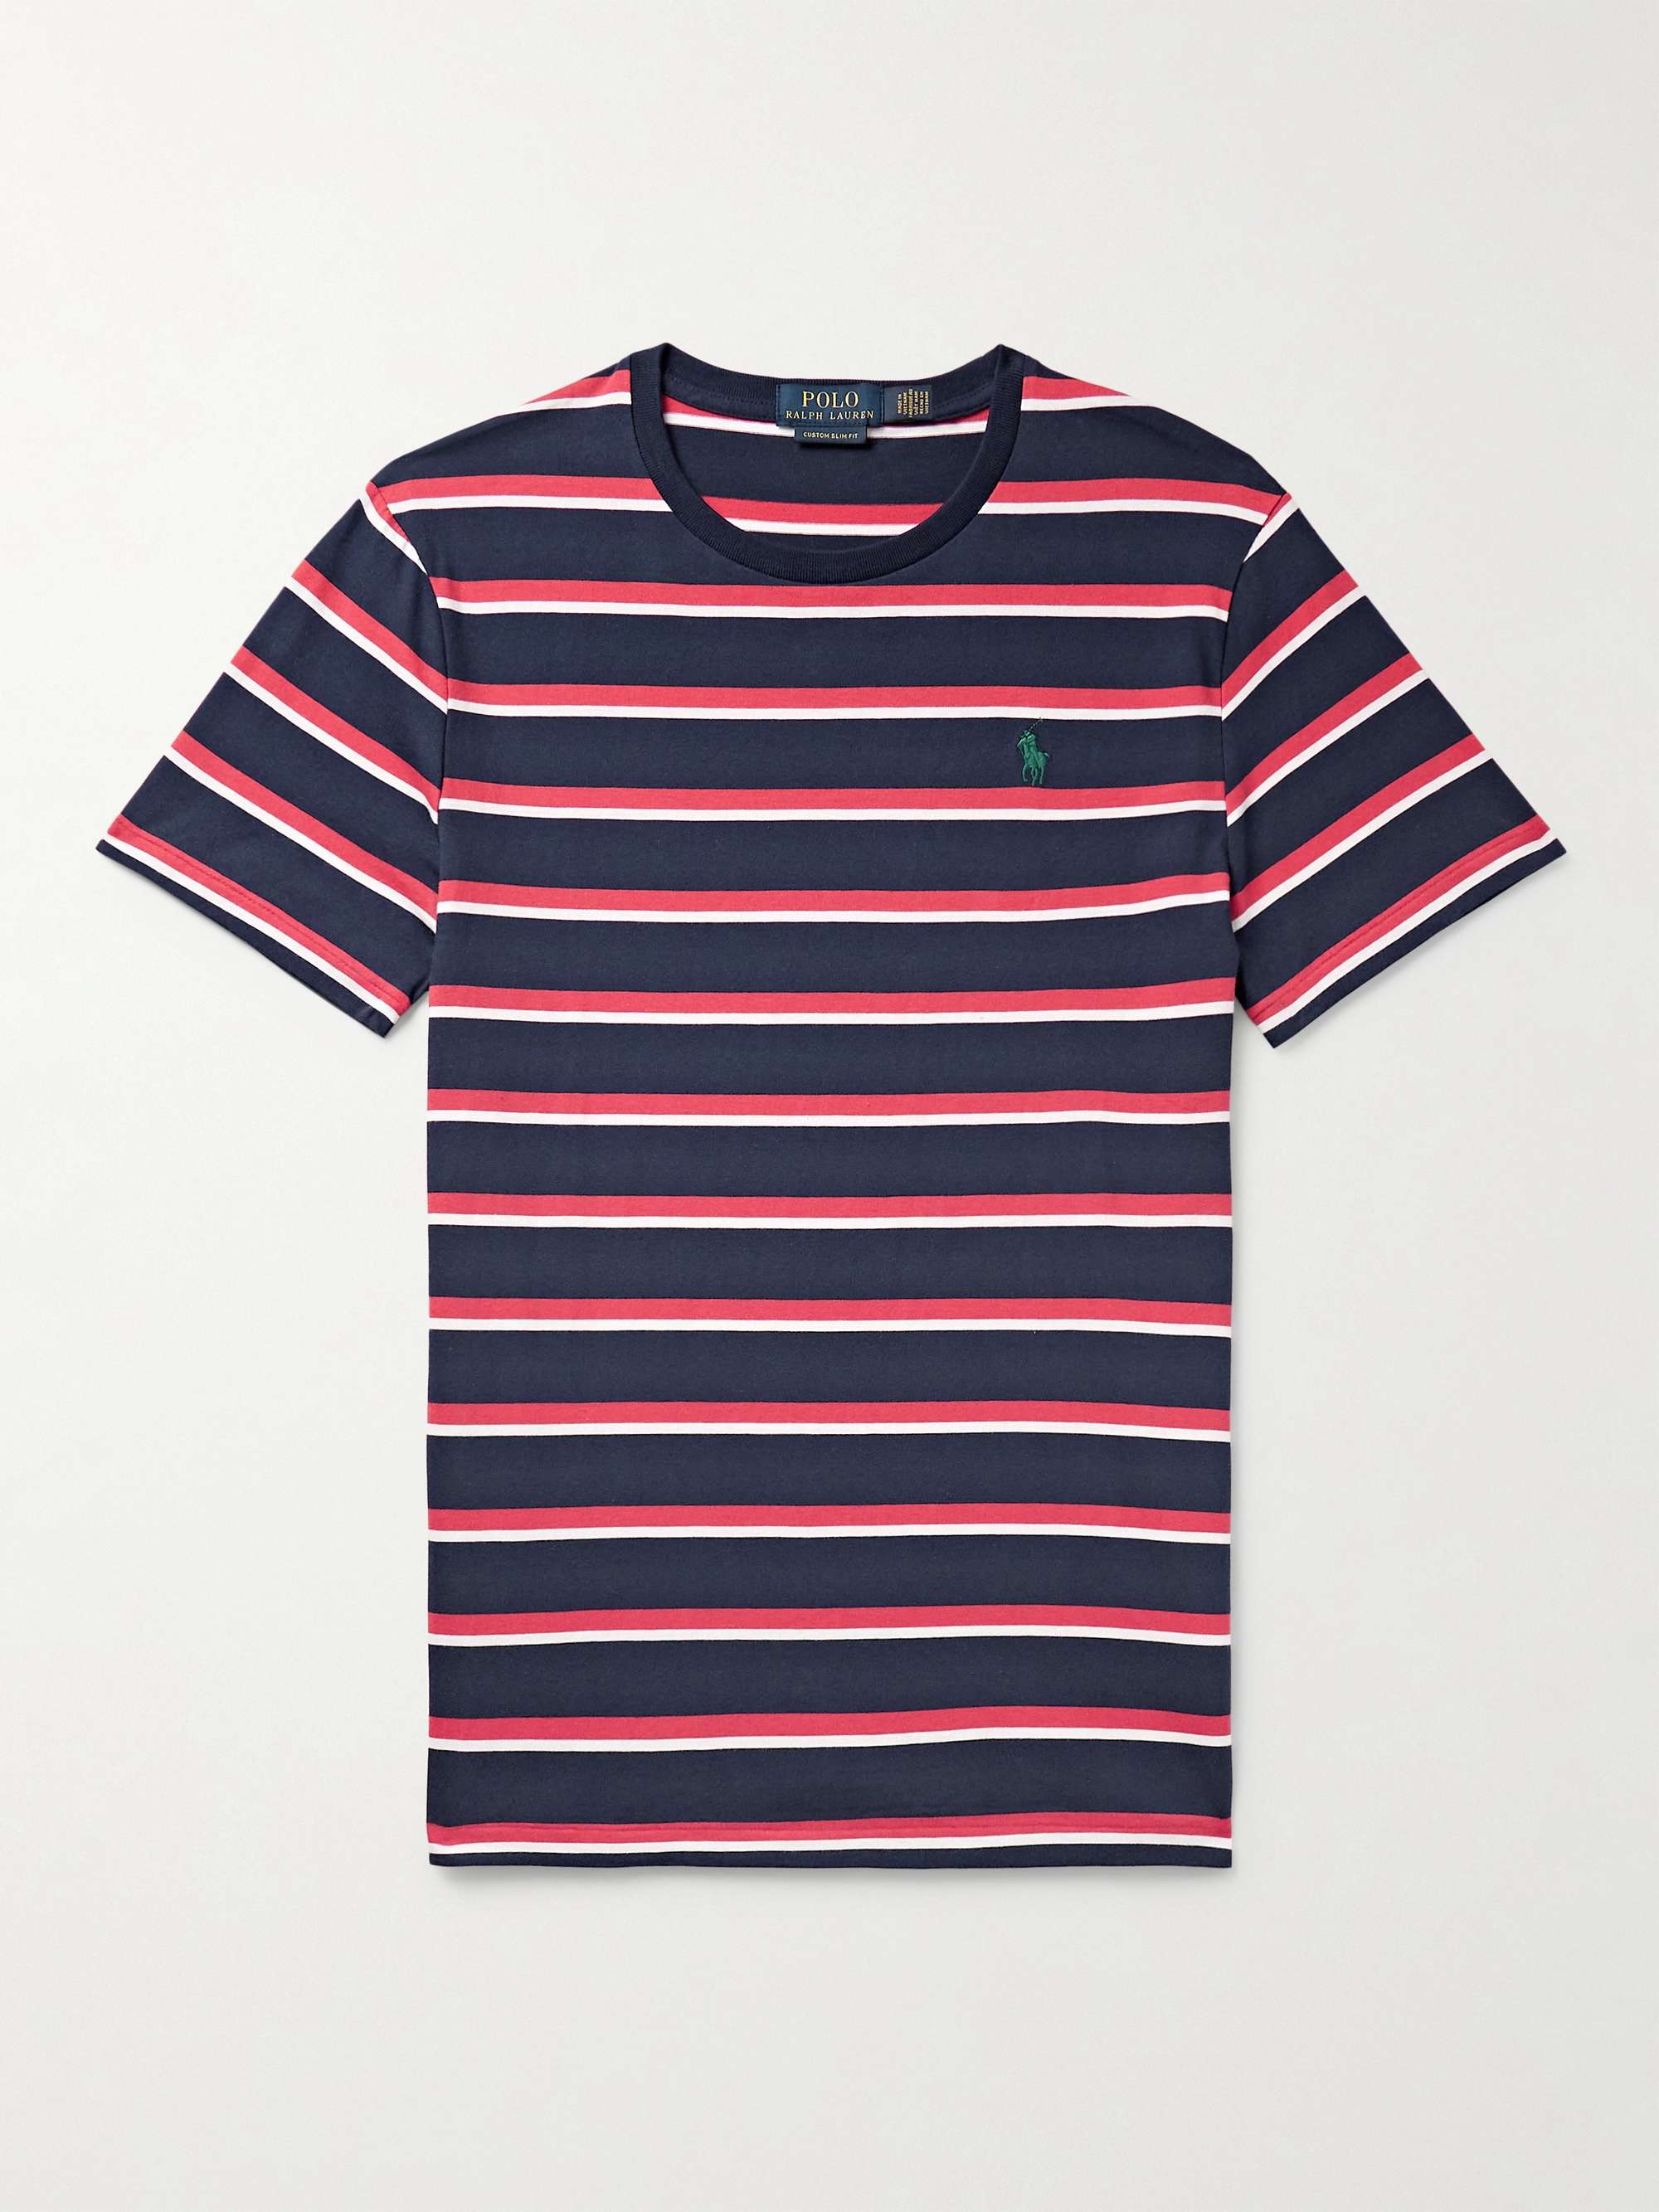 POLO RALPH LAUREN Slim-Fit Logo-Embroidered Striped Cotton-Jersey